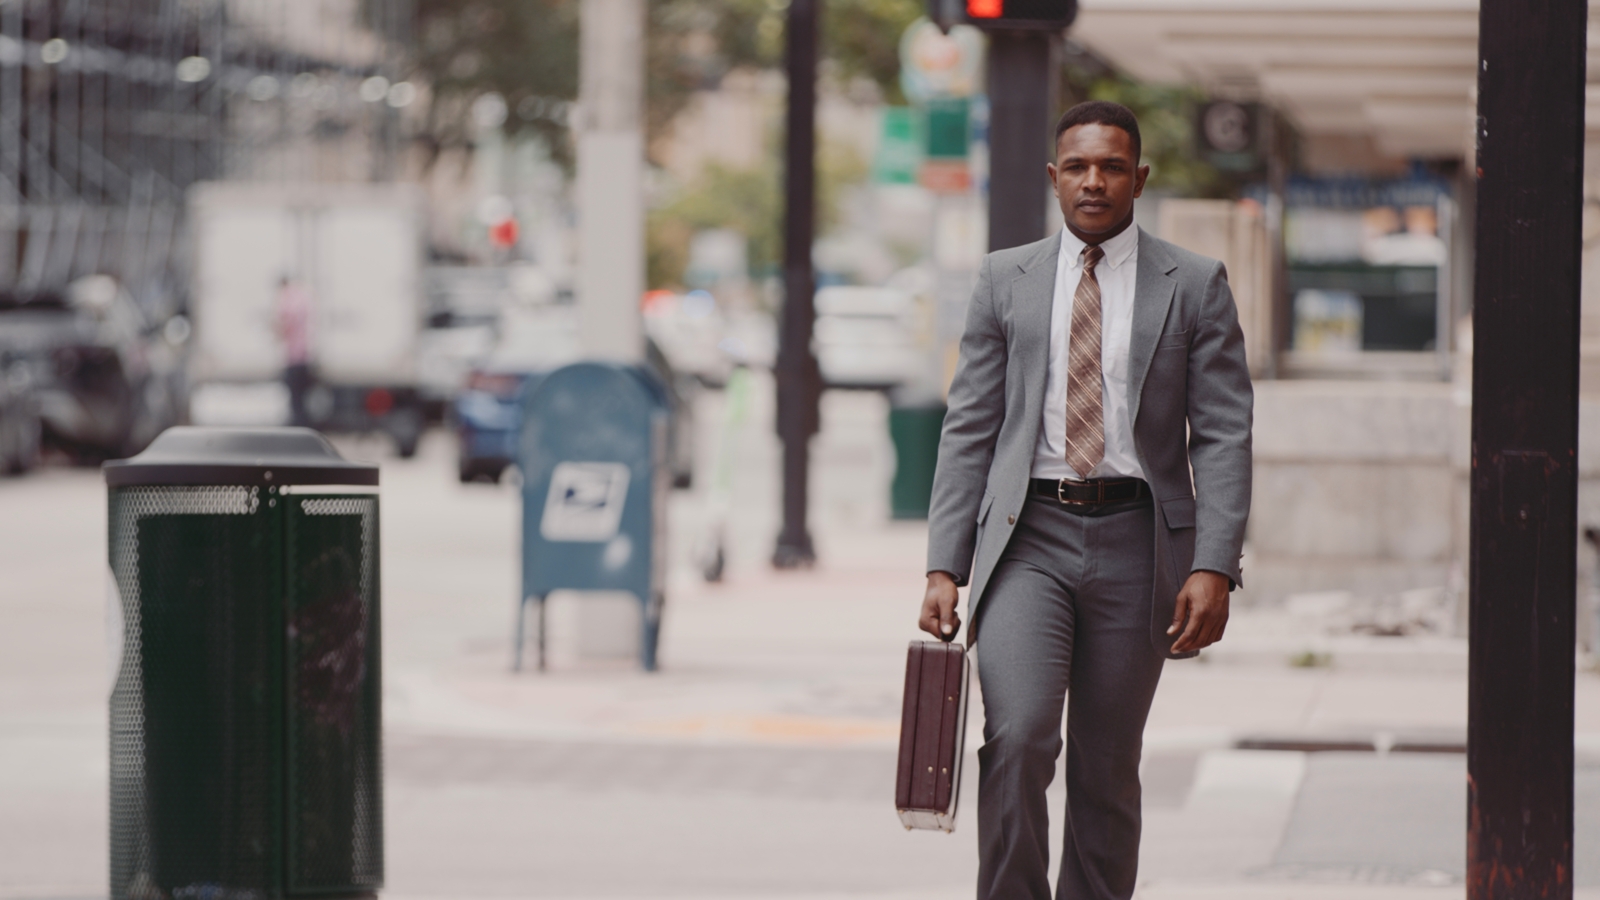 IU African American man walking down a city street wearing a gray suit carrying a brown briefcase